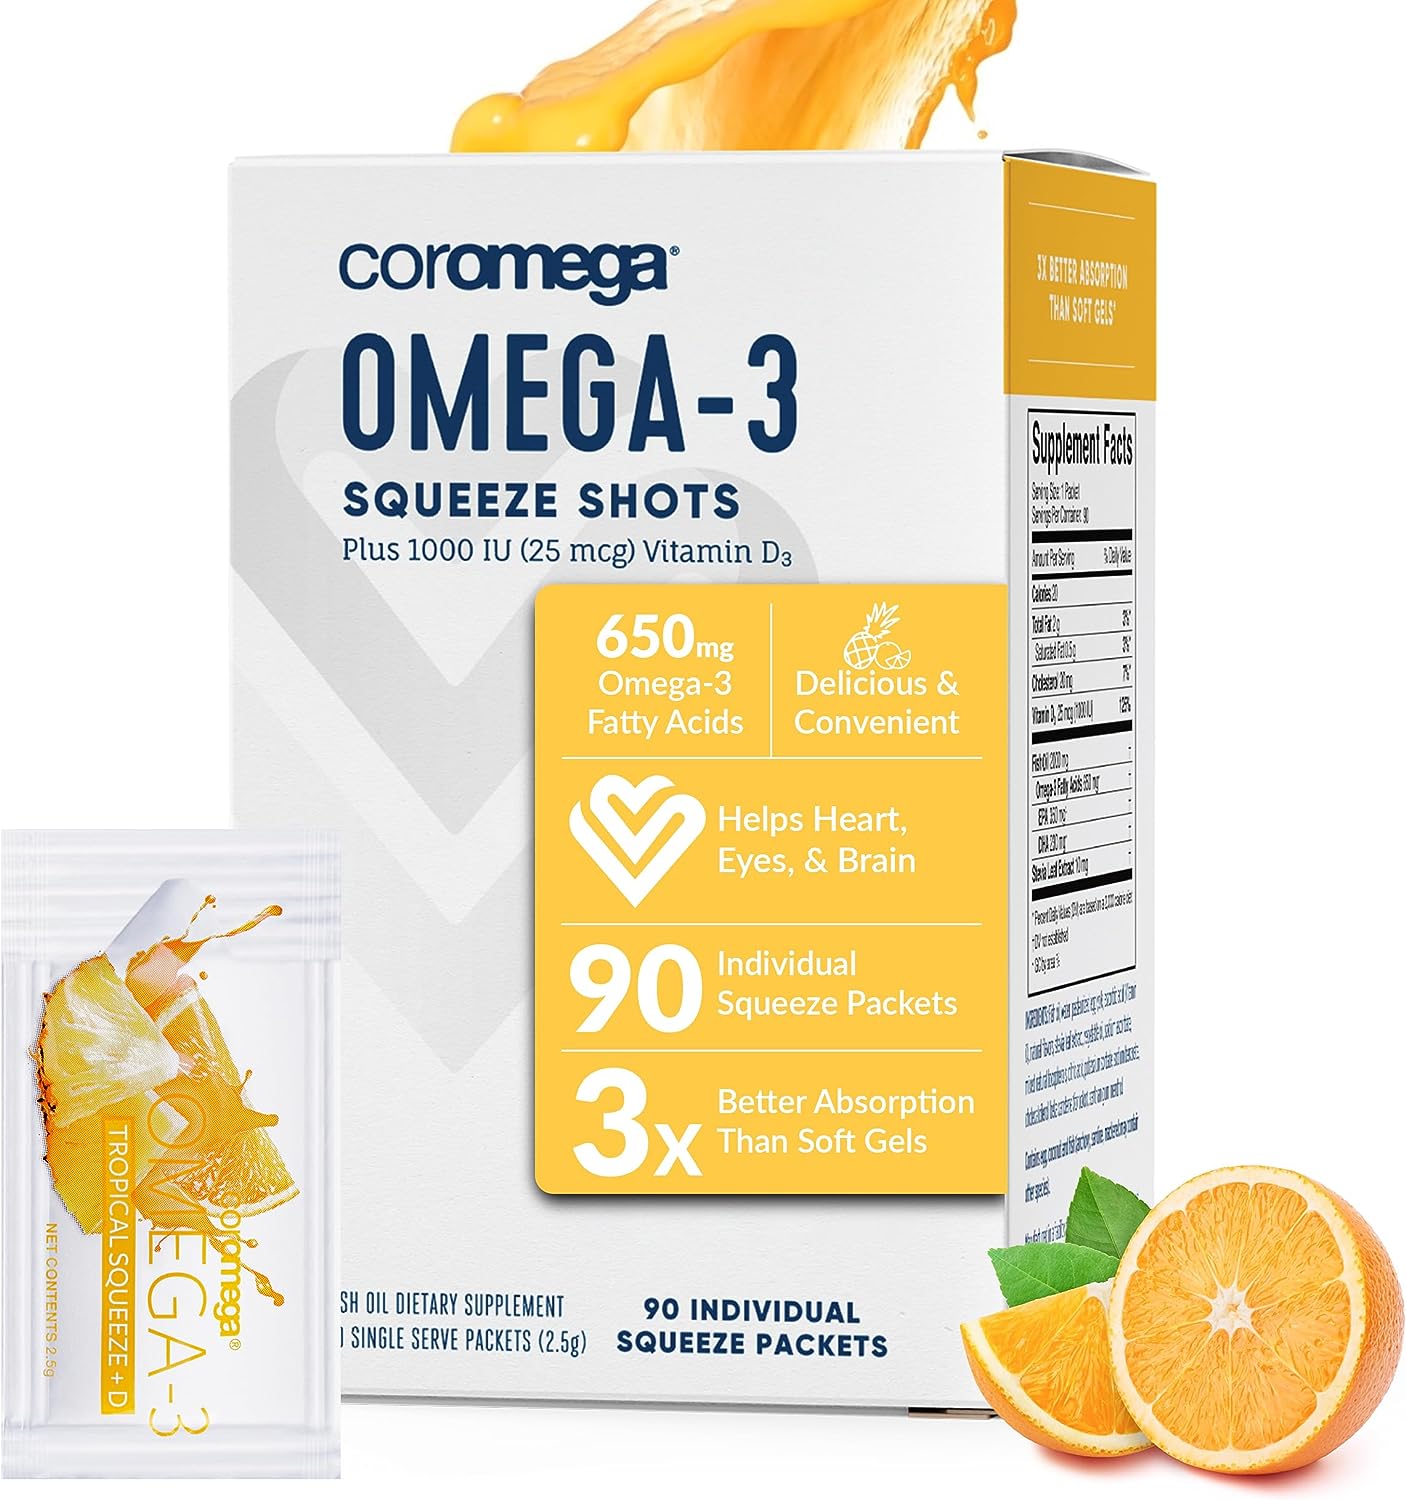 Coromega Omega 3 Fish Oil Supplement with Vitamin D3, 650mg of Omega-3s with 3X Better Absorption Than Softgels, Tropica